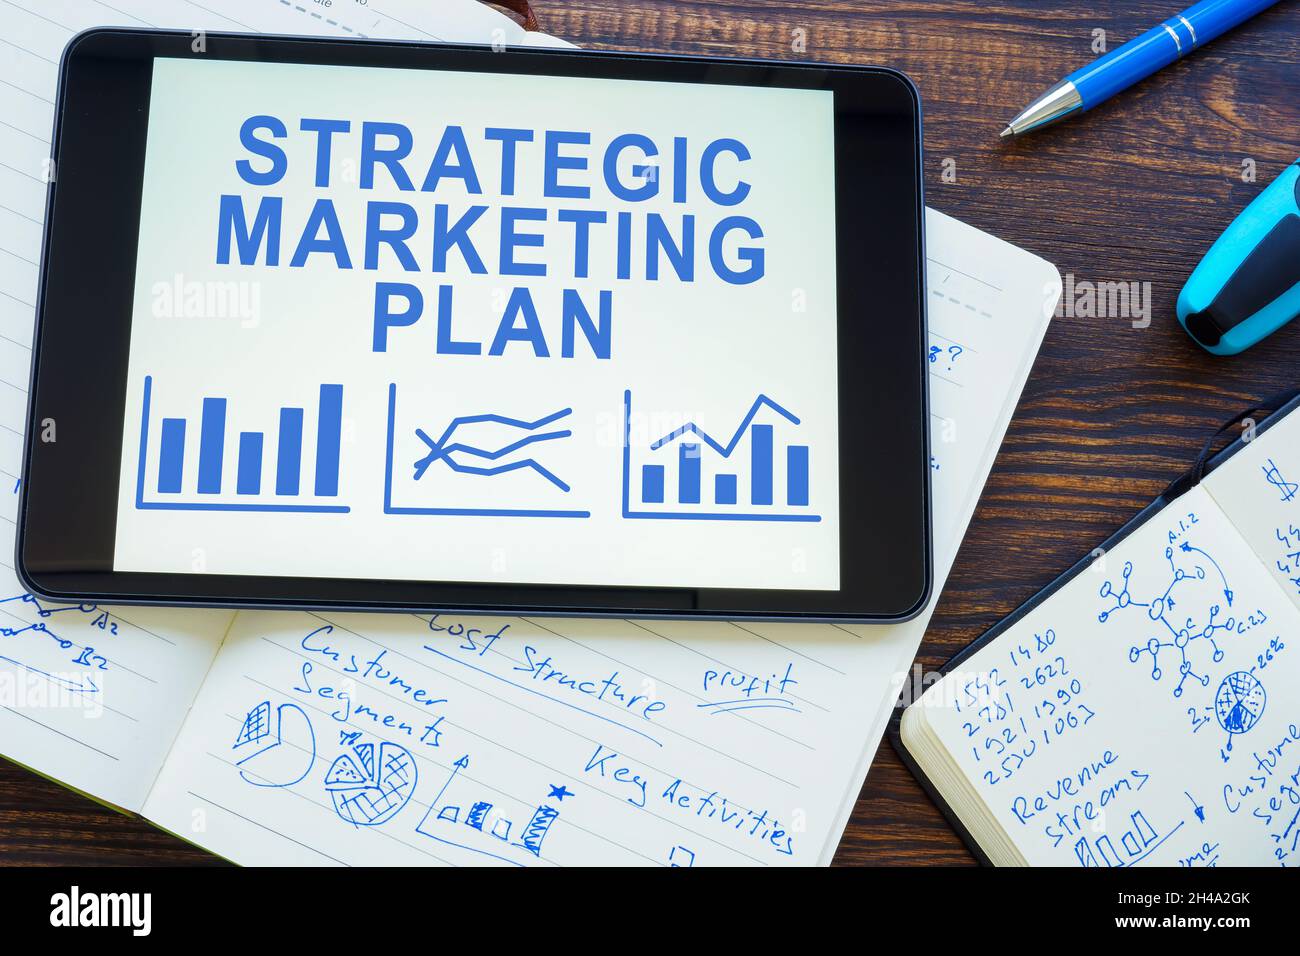 Strategic marketing plan in the tablet and papers. Stock Photo